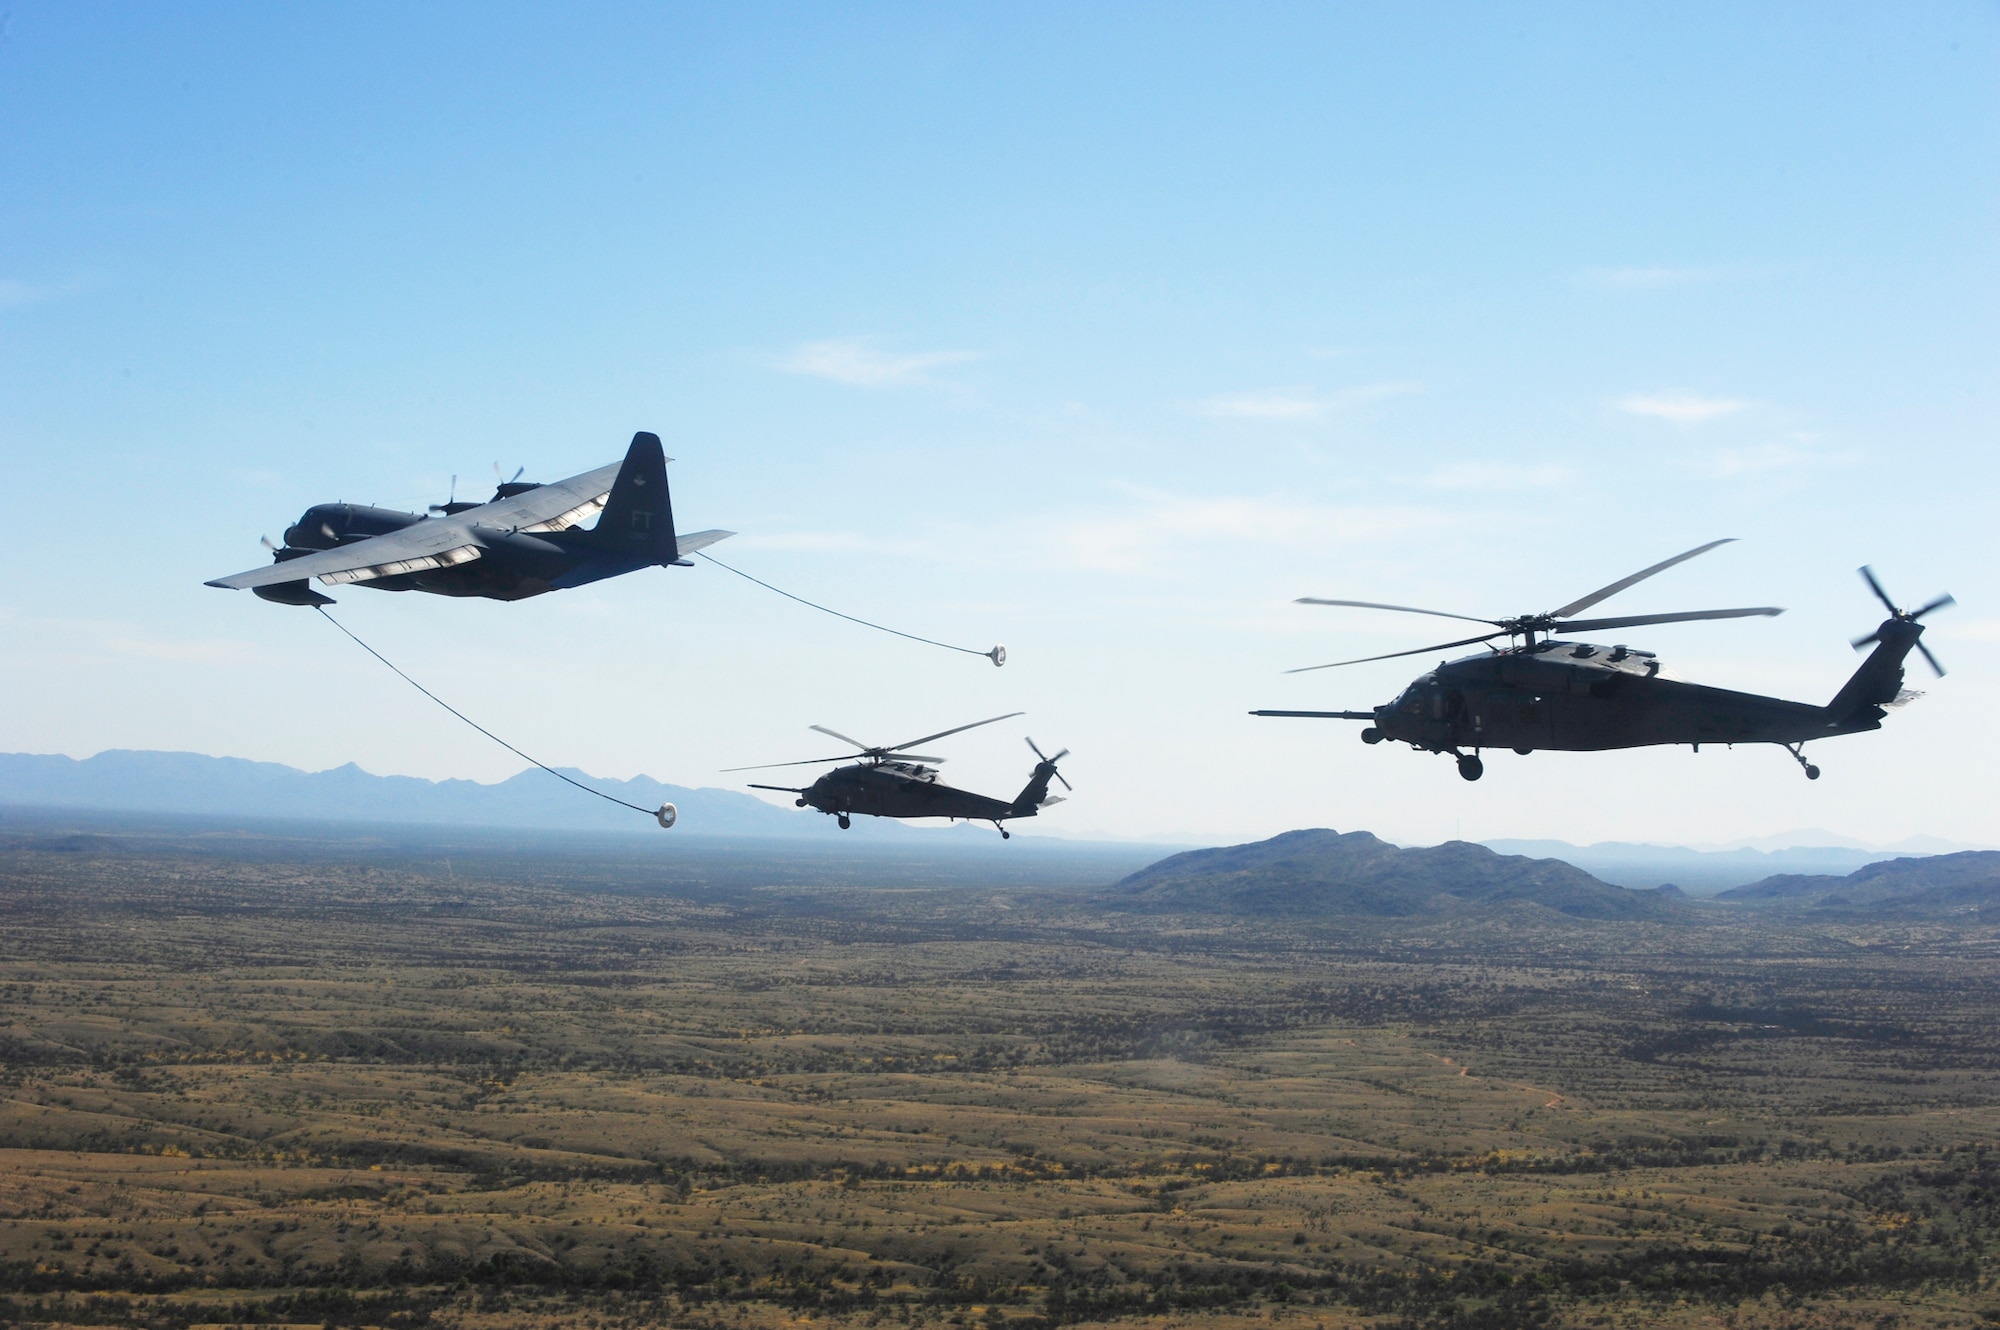 An HC-130P/N King refuels two HH-60 Pave Hawks April 15, 2010, over the desert surrounding Davis-Monthan Air Force Base, Ariz., during Angel Thunder 2010. The HC-130 is with the 71st Rescue Squadron at Moody AFB, Ga.  Angel Thunder 2010, an Air Combat Command-sponsored exercise, will be the largest personnel recovery and combat search and rescue exercise to date, combining Department of Defense and non-DOD assets.  (U.S. Air Force photo/Staff Sgt. Joshua L. DeMotts) 